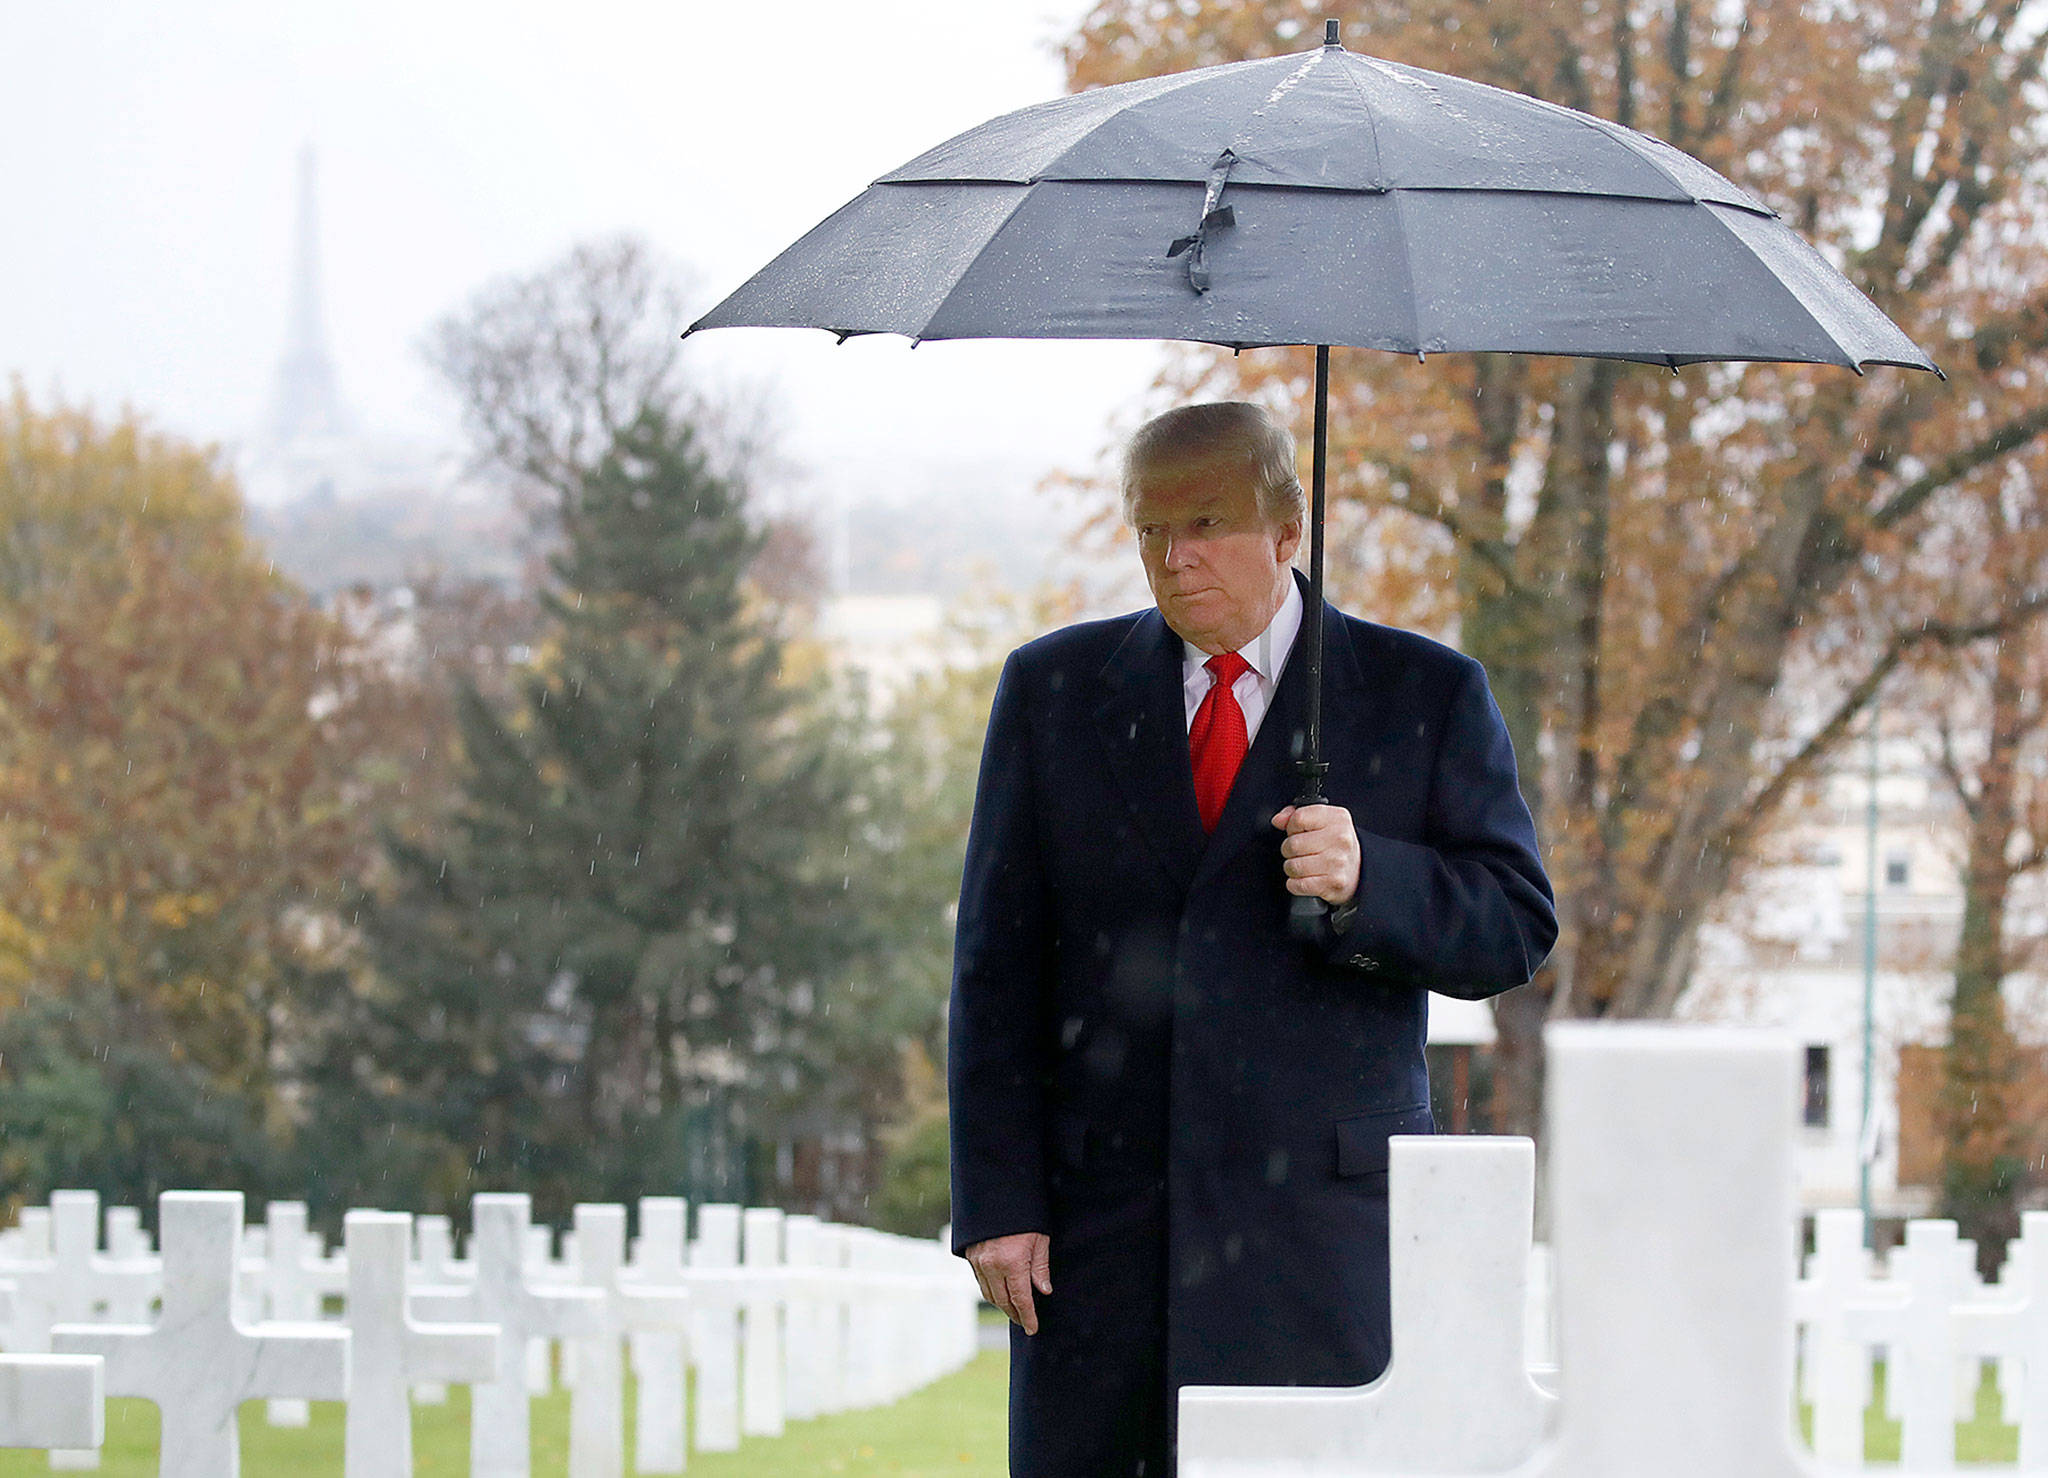 President Donald Trump stands amidst the headstones during a ceremony on Sunday at Suresnes American Cemetery near Paris. (AP Photo/Jacquelyn Martin)